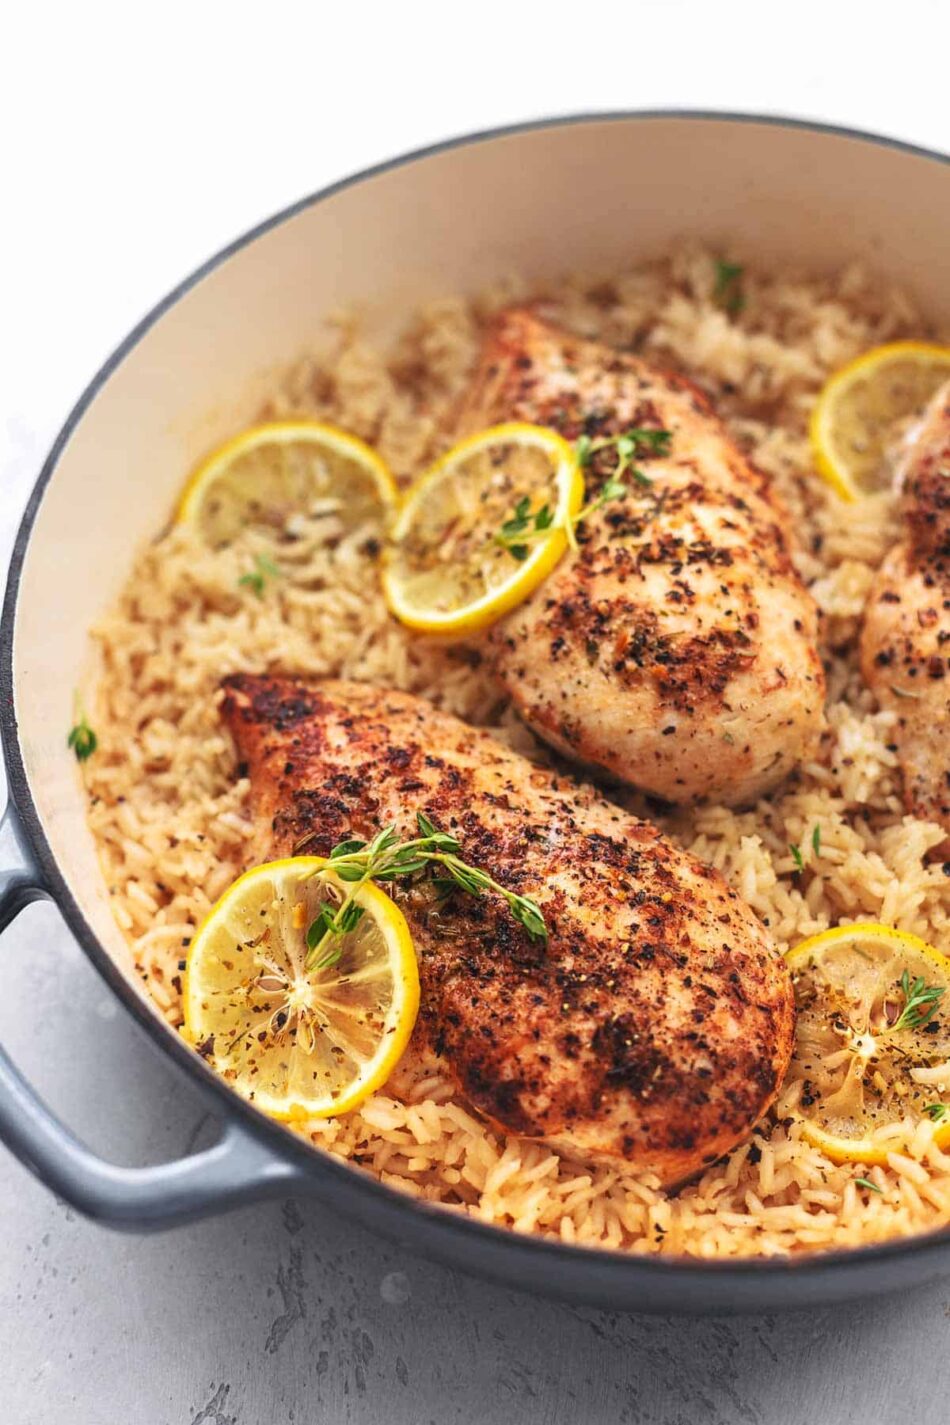 One Pot Lemon Herb Chicken and Rice